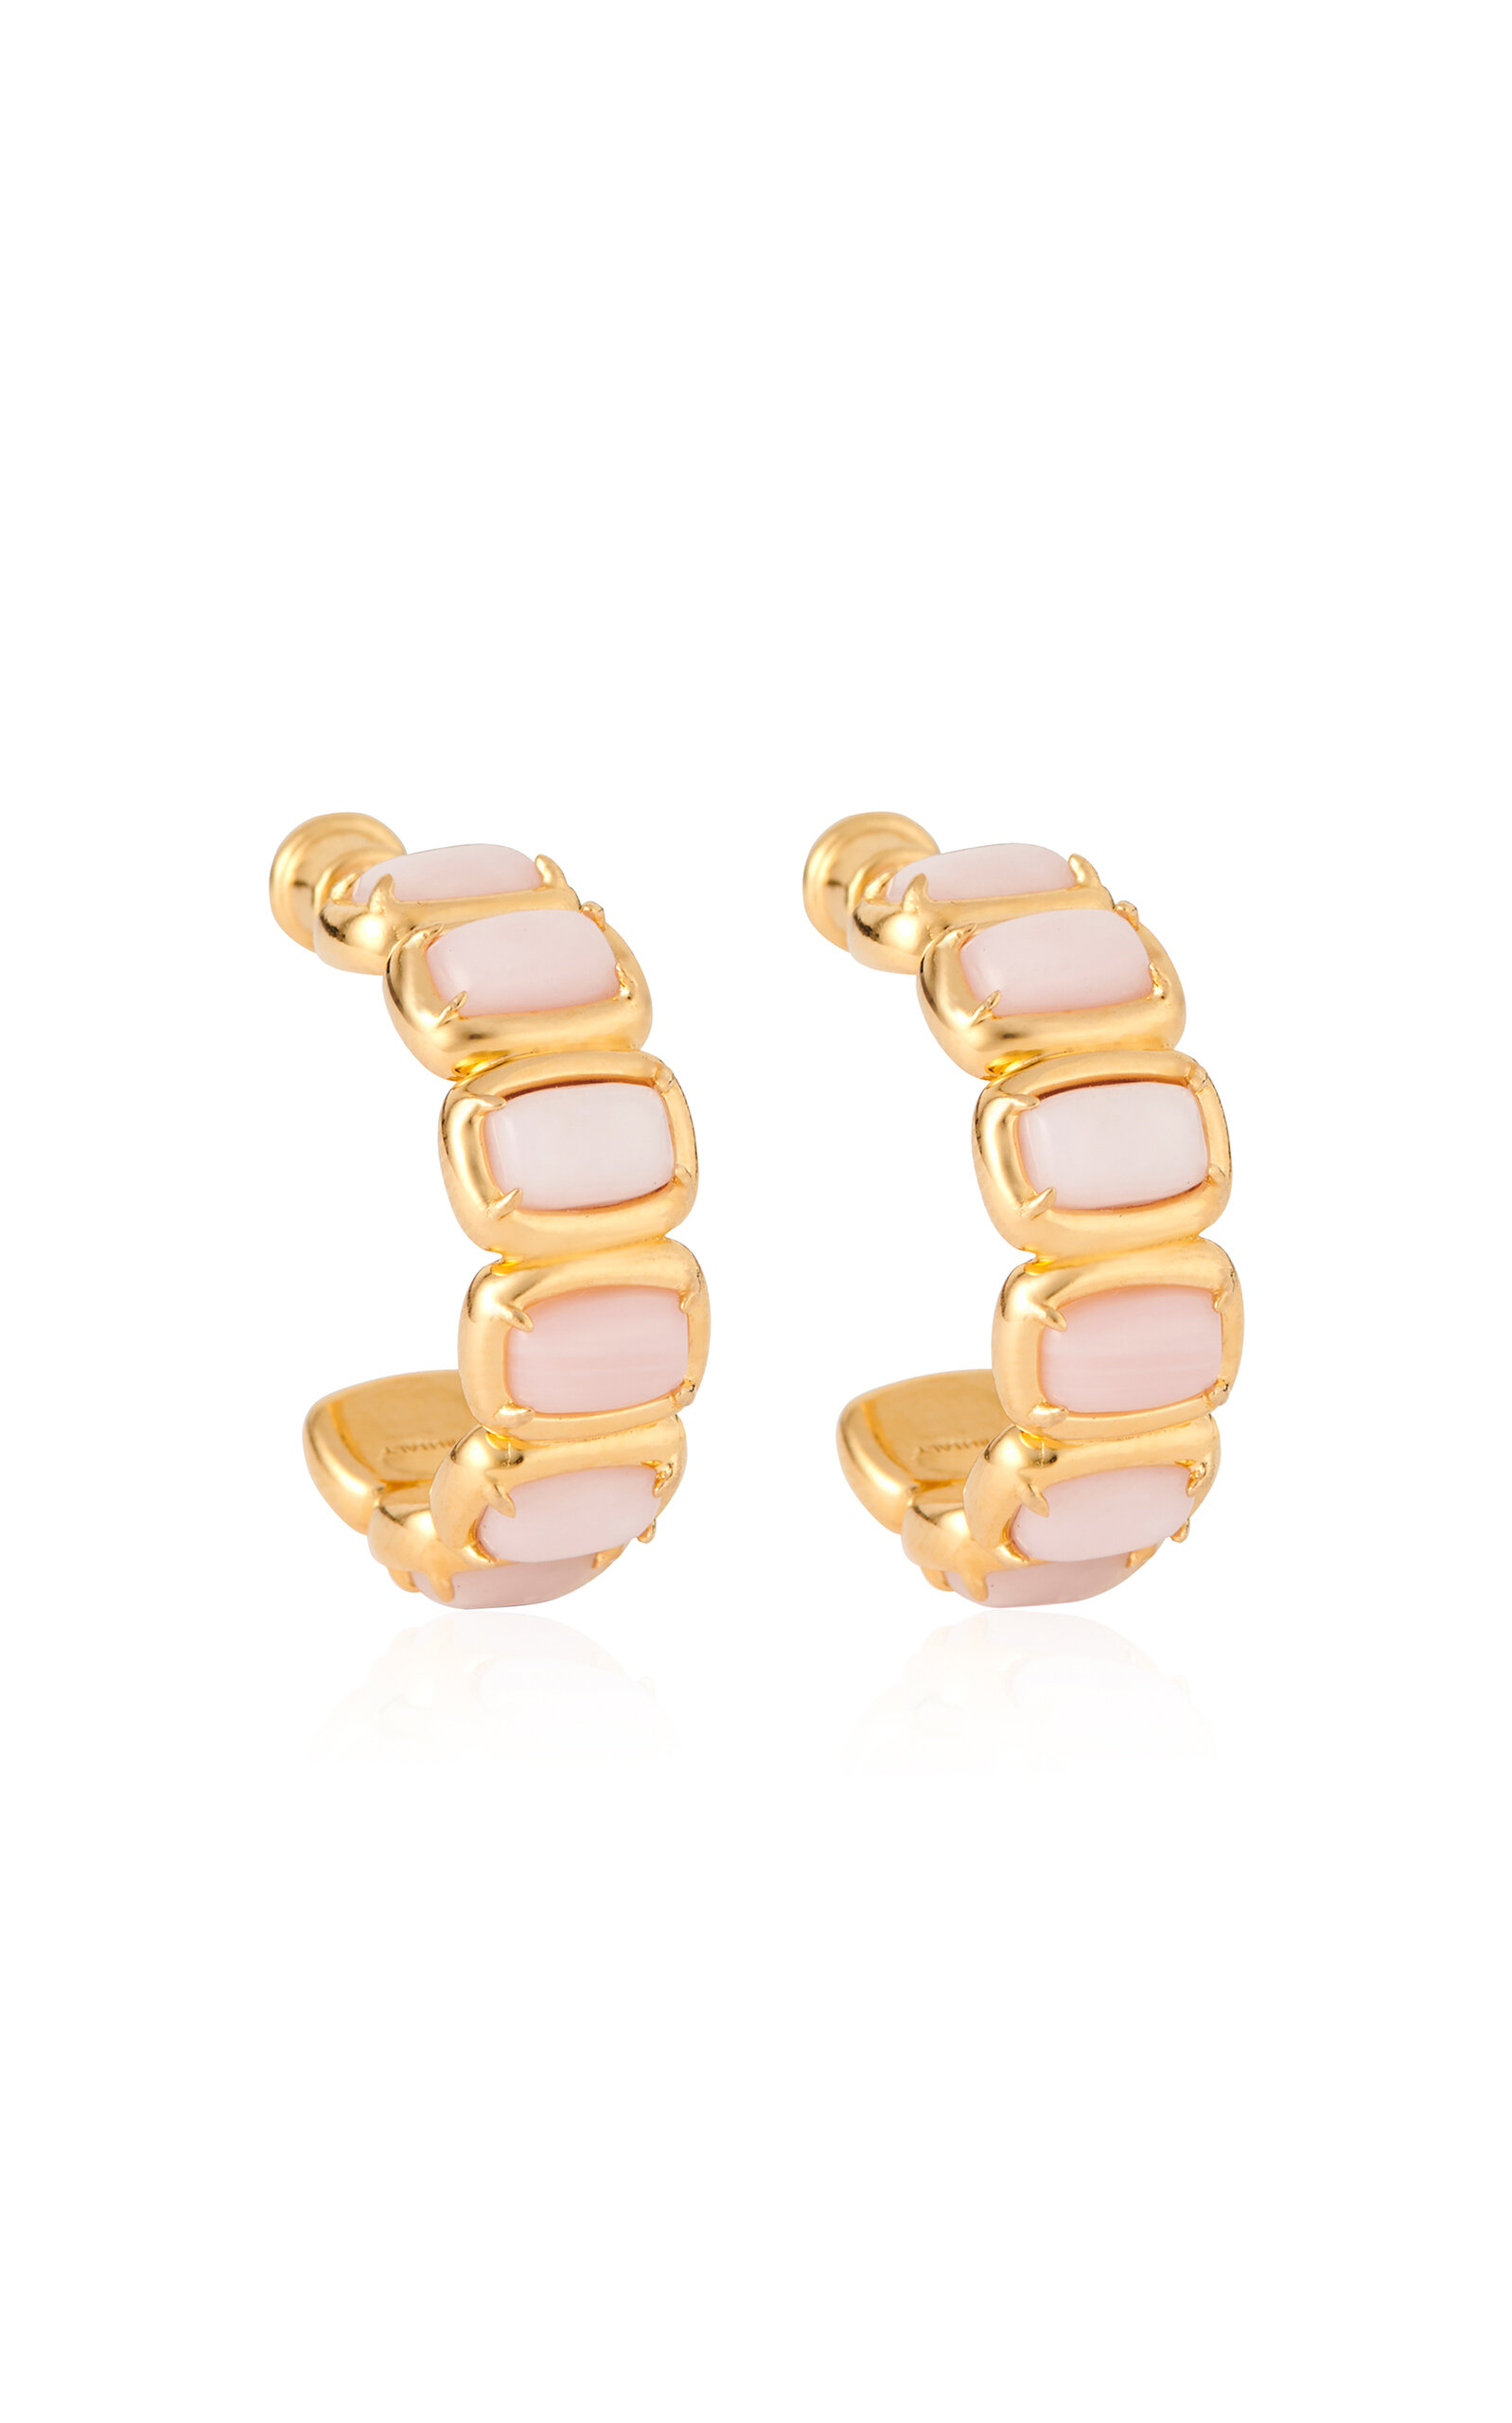 IVI Women's Small Toy 18k Gold-Plated Pink Opal Earrings